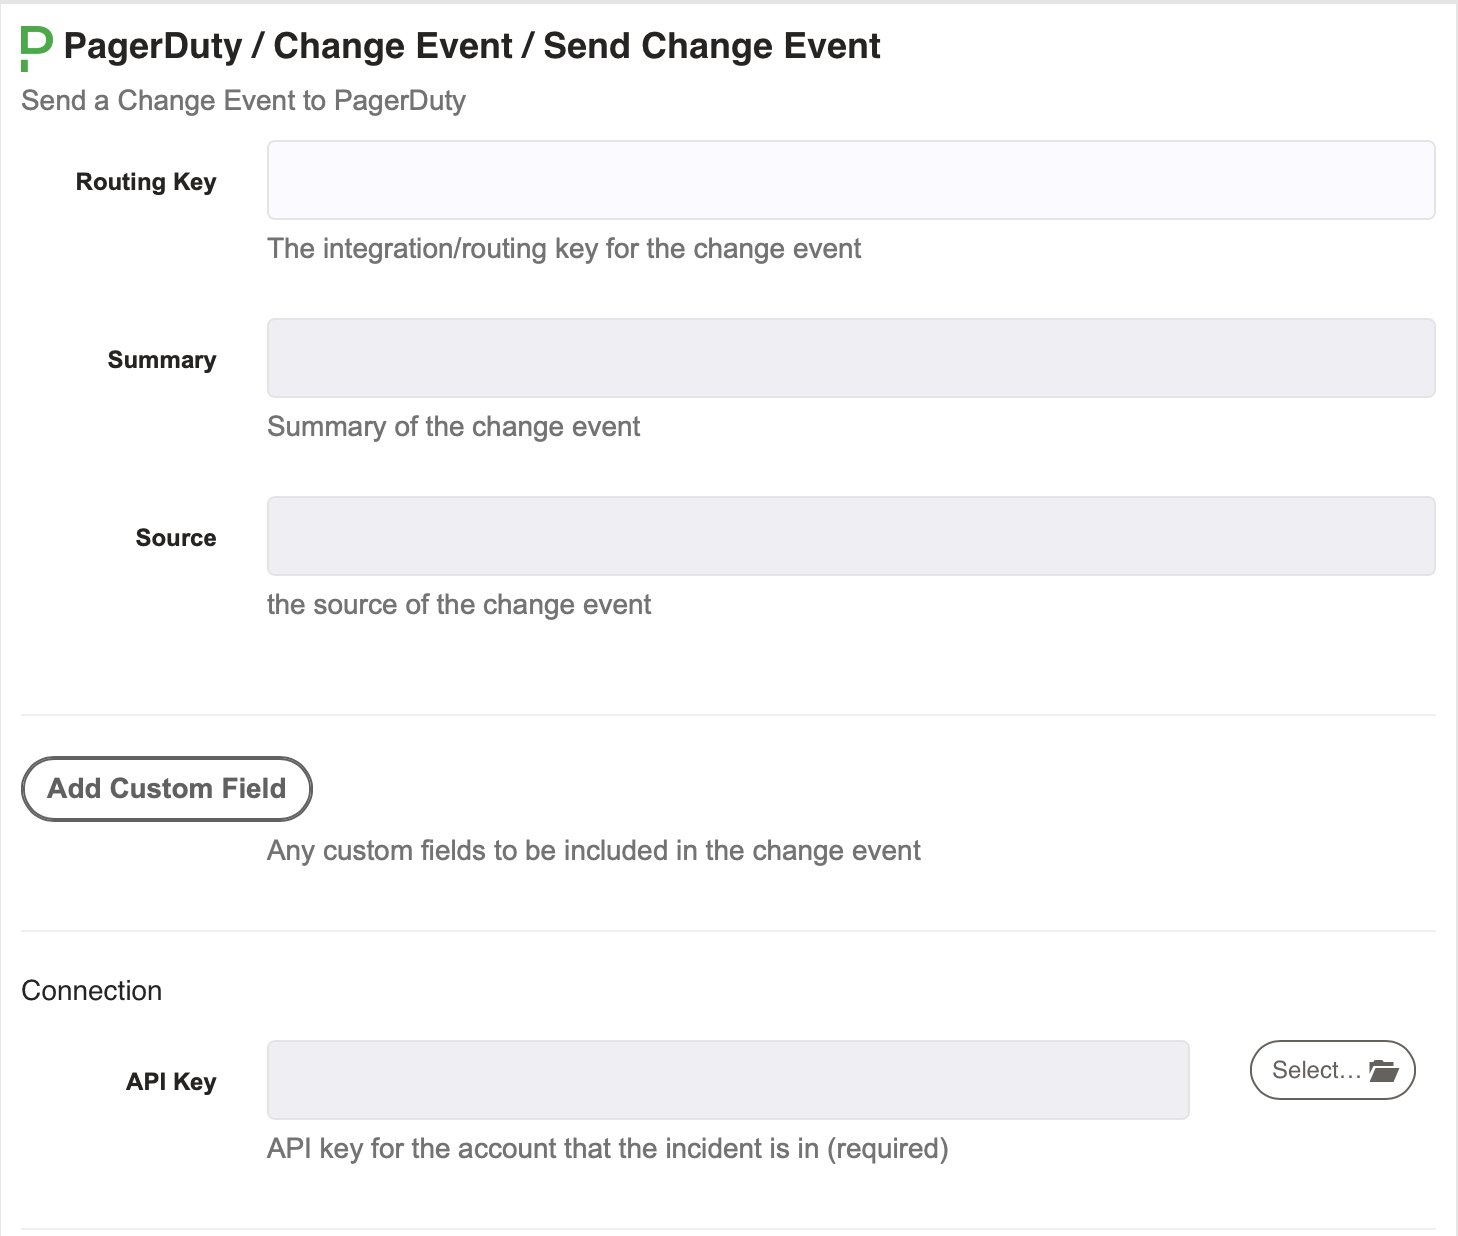 PagerDuty - Send Change Event